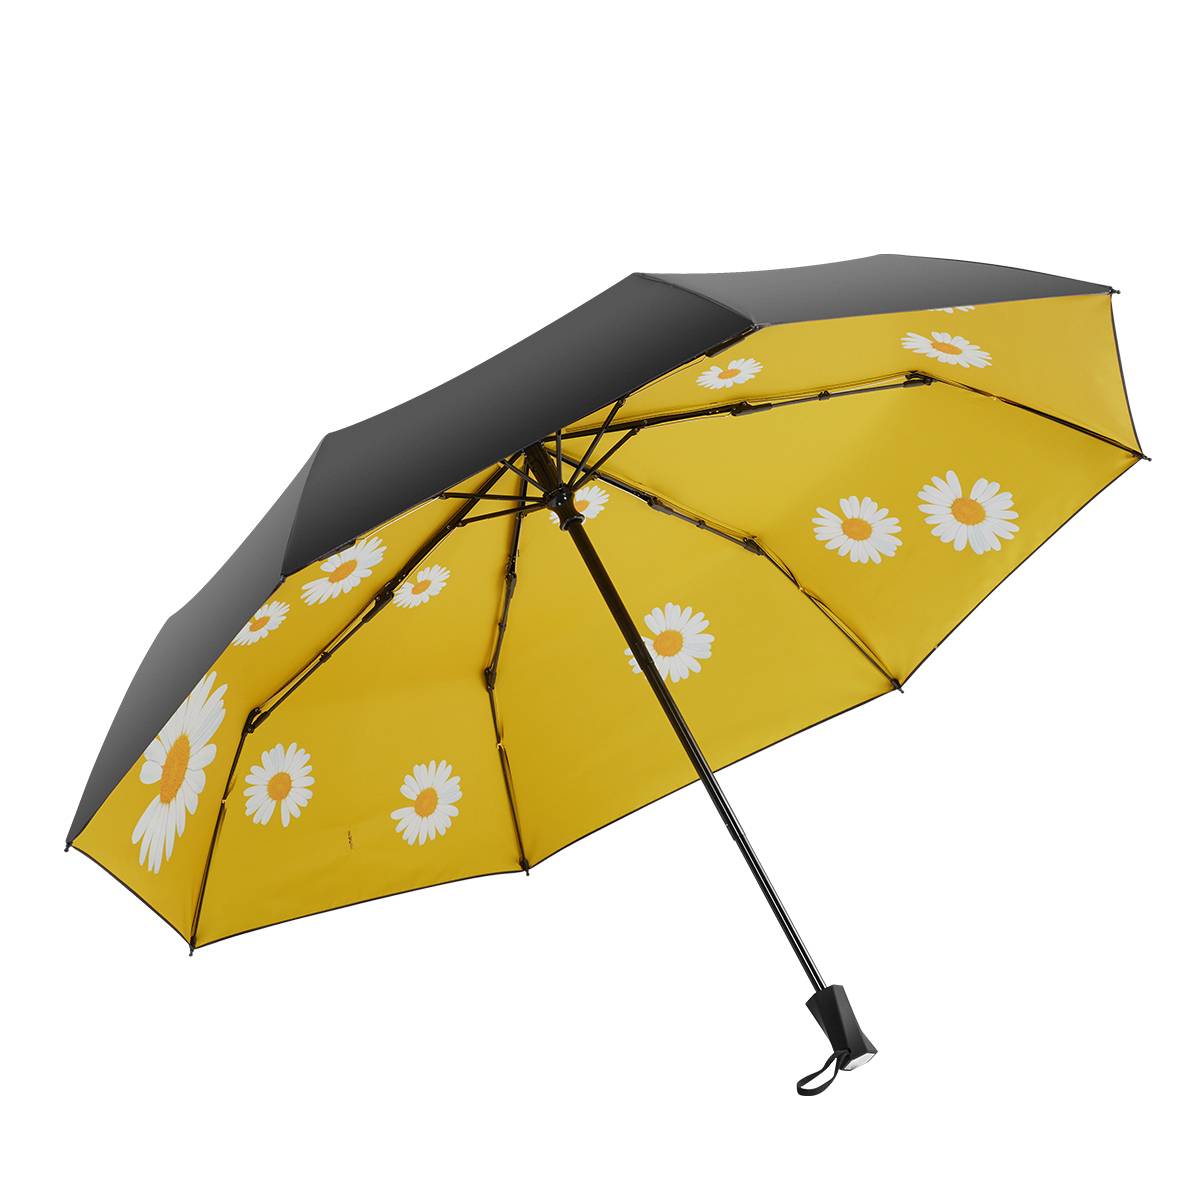 Reasonable price for Umbrella With Microfiber - 21 inch 8 ribs manual open unique handle design with daisy flower 3 fold umbrella – DongFangZhanXin